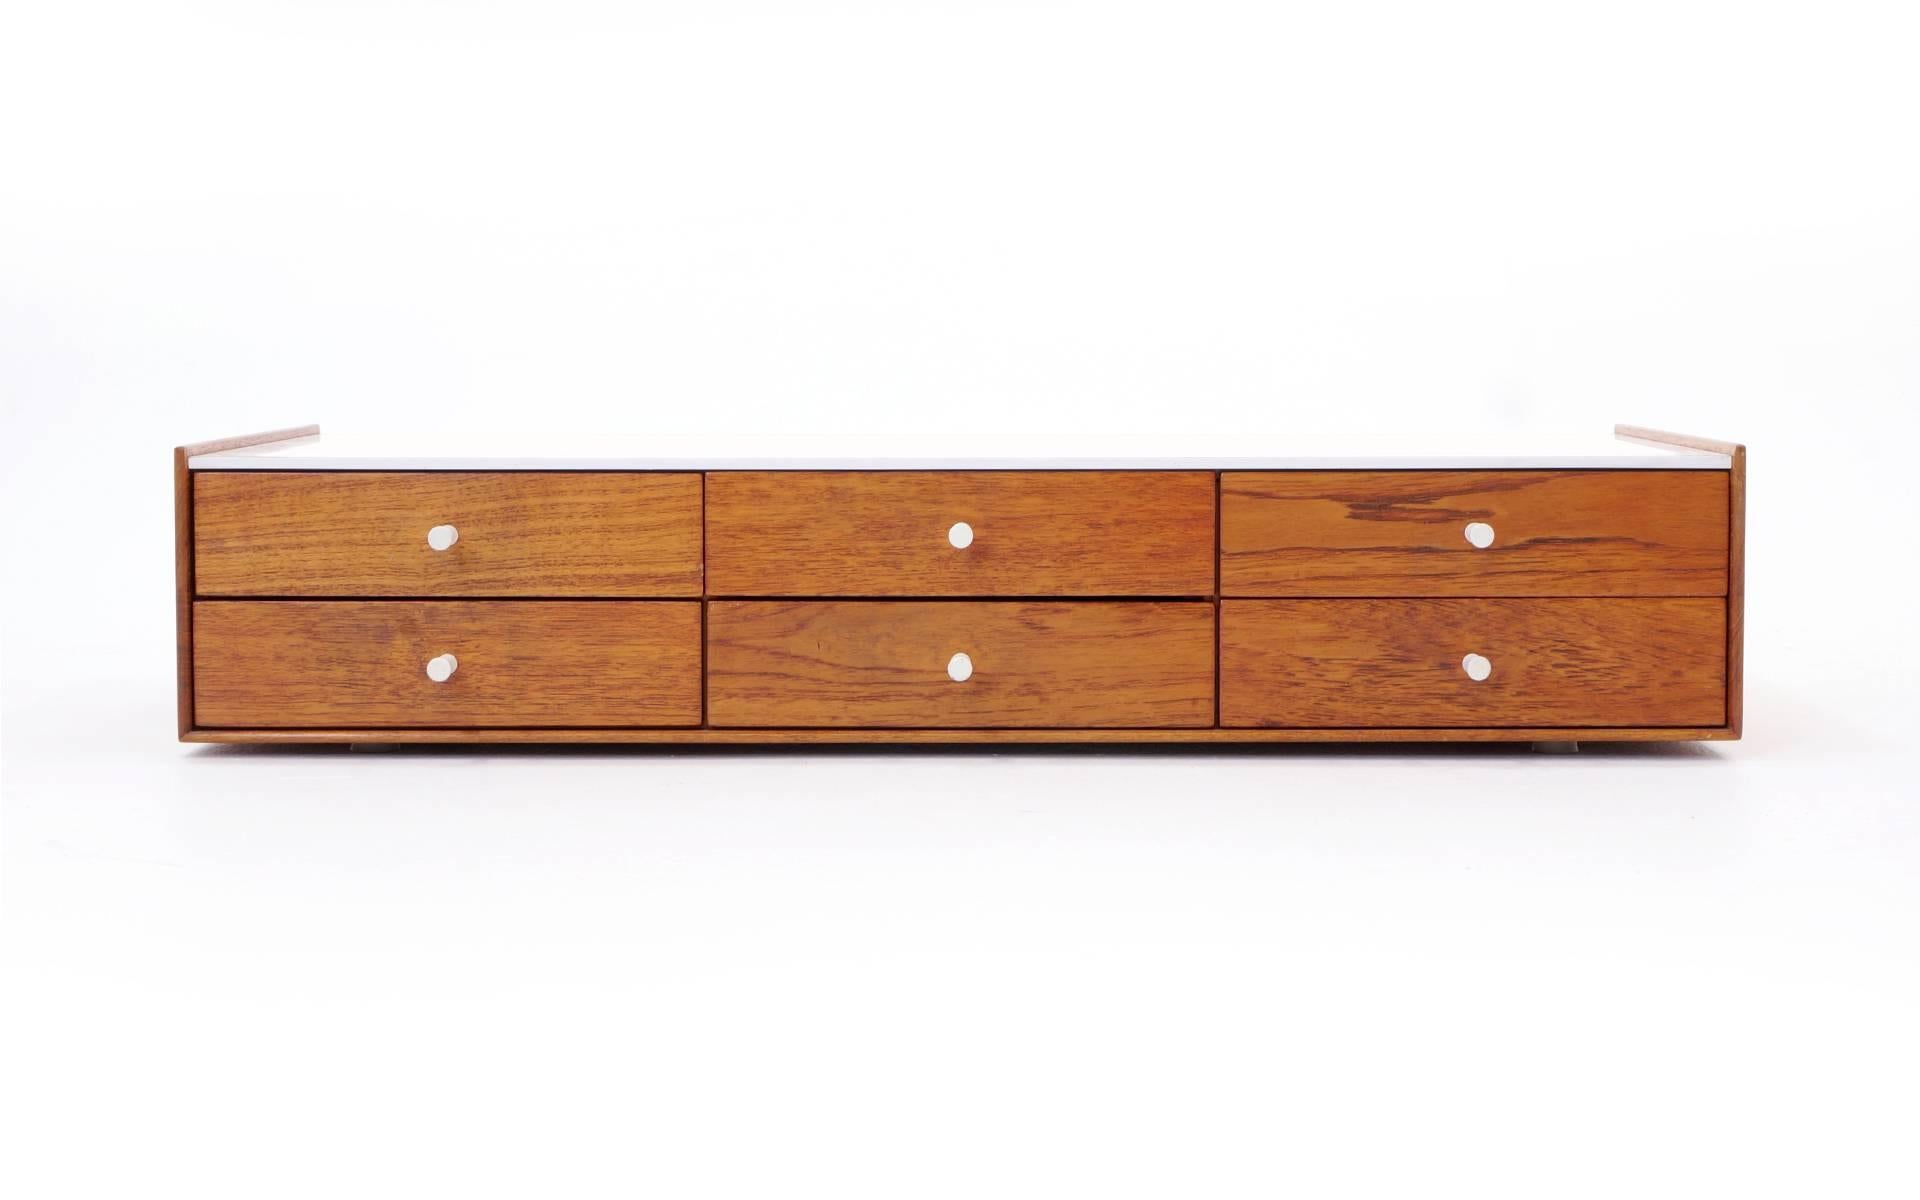 Early George Nelson for Herman Miller Jewelry cabinet. Rosewood drawer fronts, walnut sides and back, white laminate top and original porcelain pulls. Original finish. This is a beautiful example of this design.